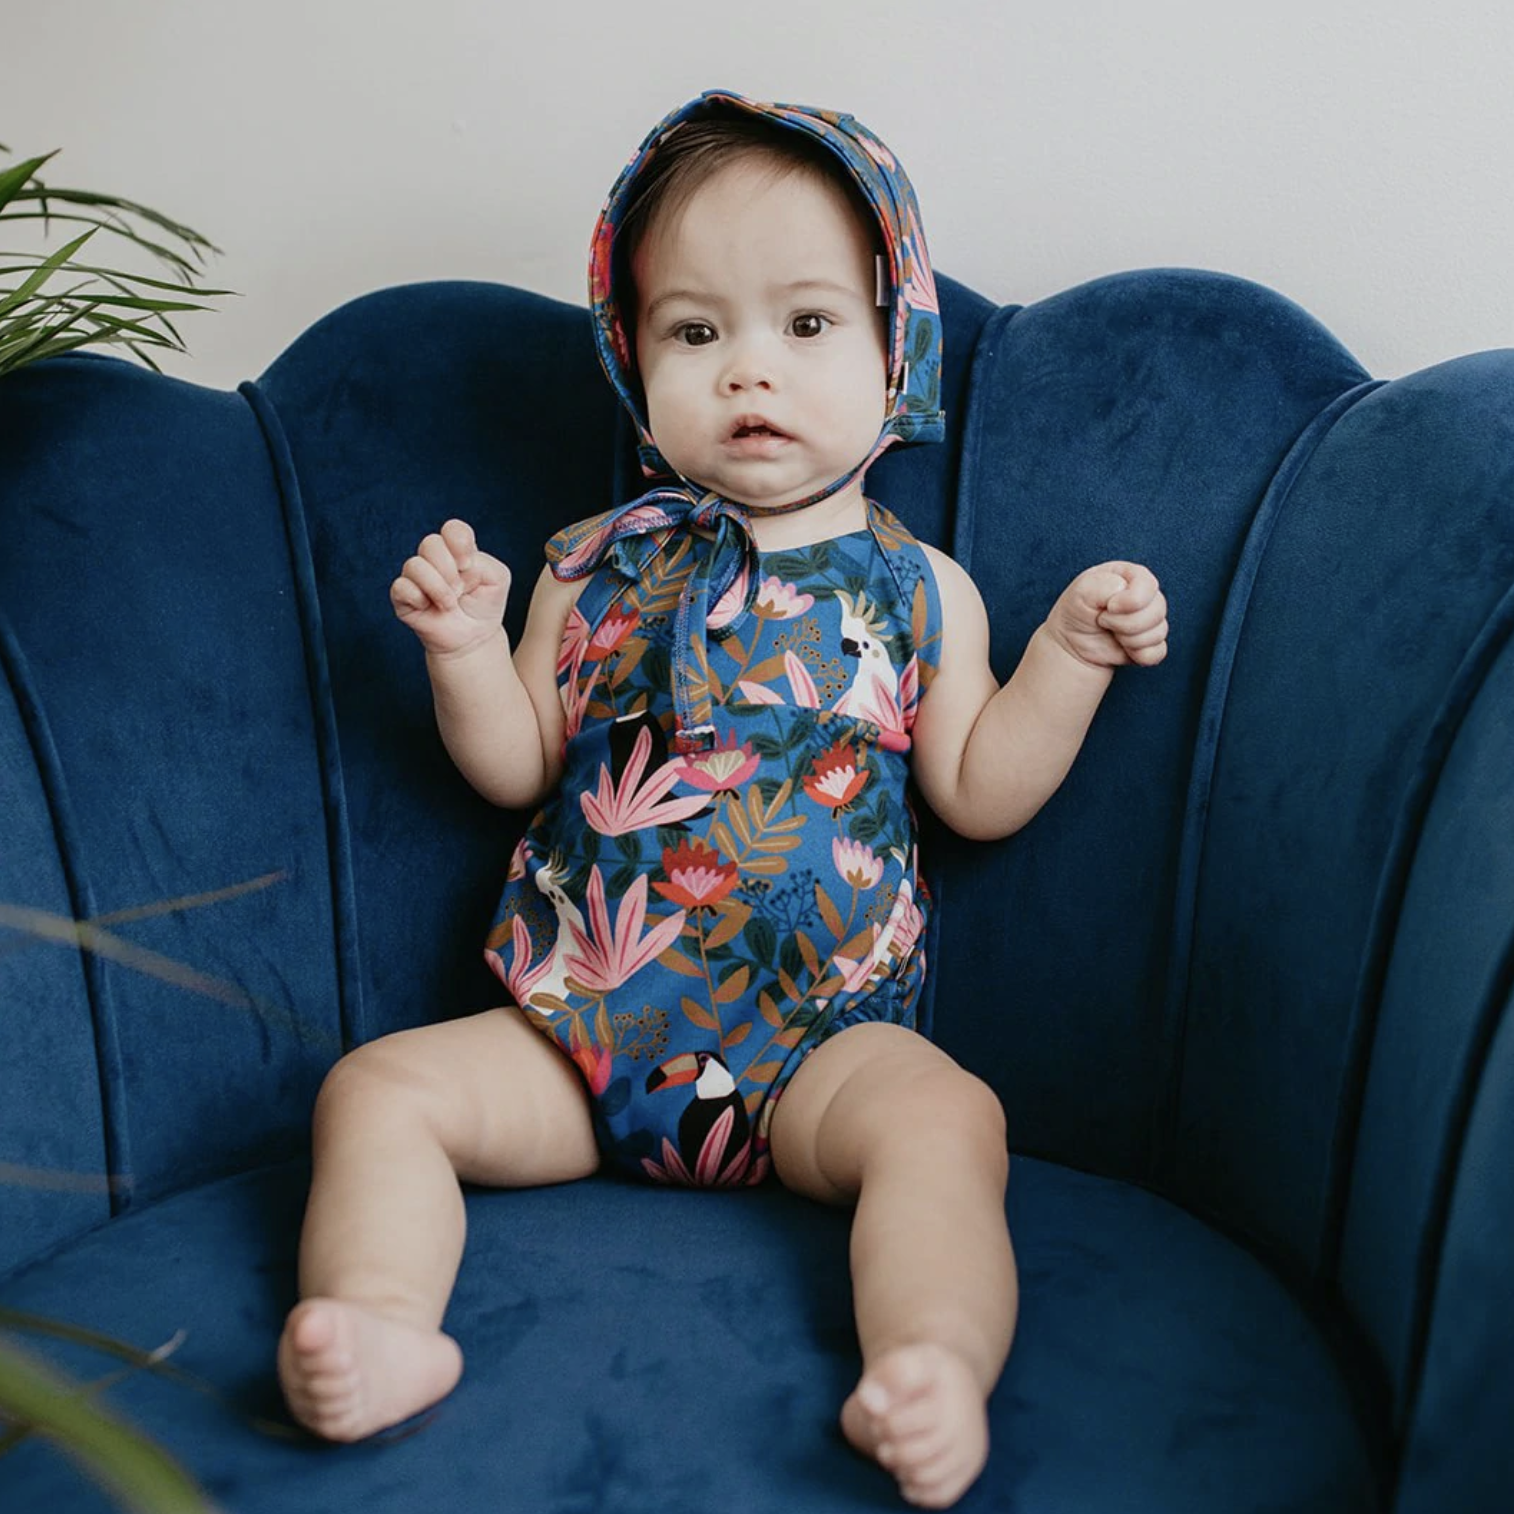 A baby sitting on a velour chair wearing the floral onesie and matching bonnet